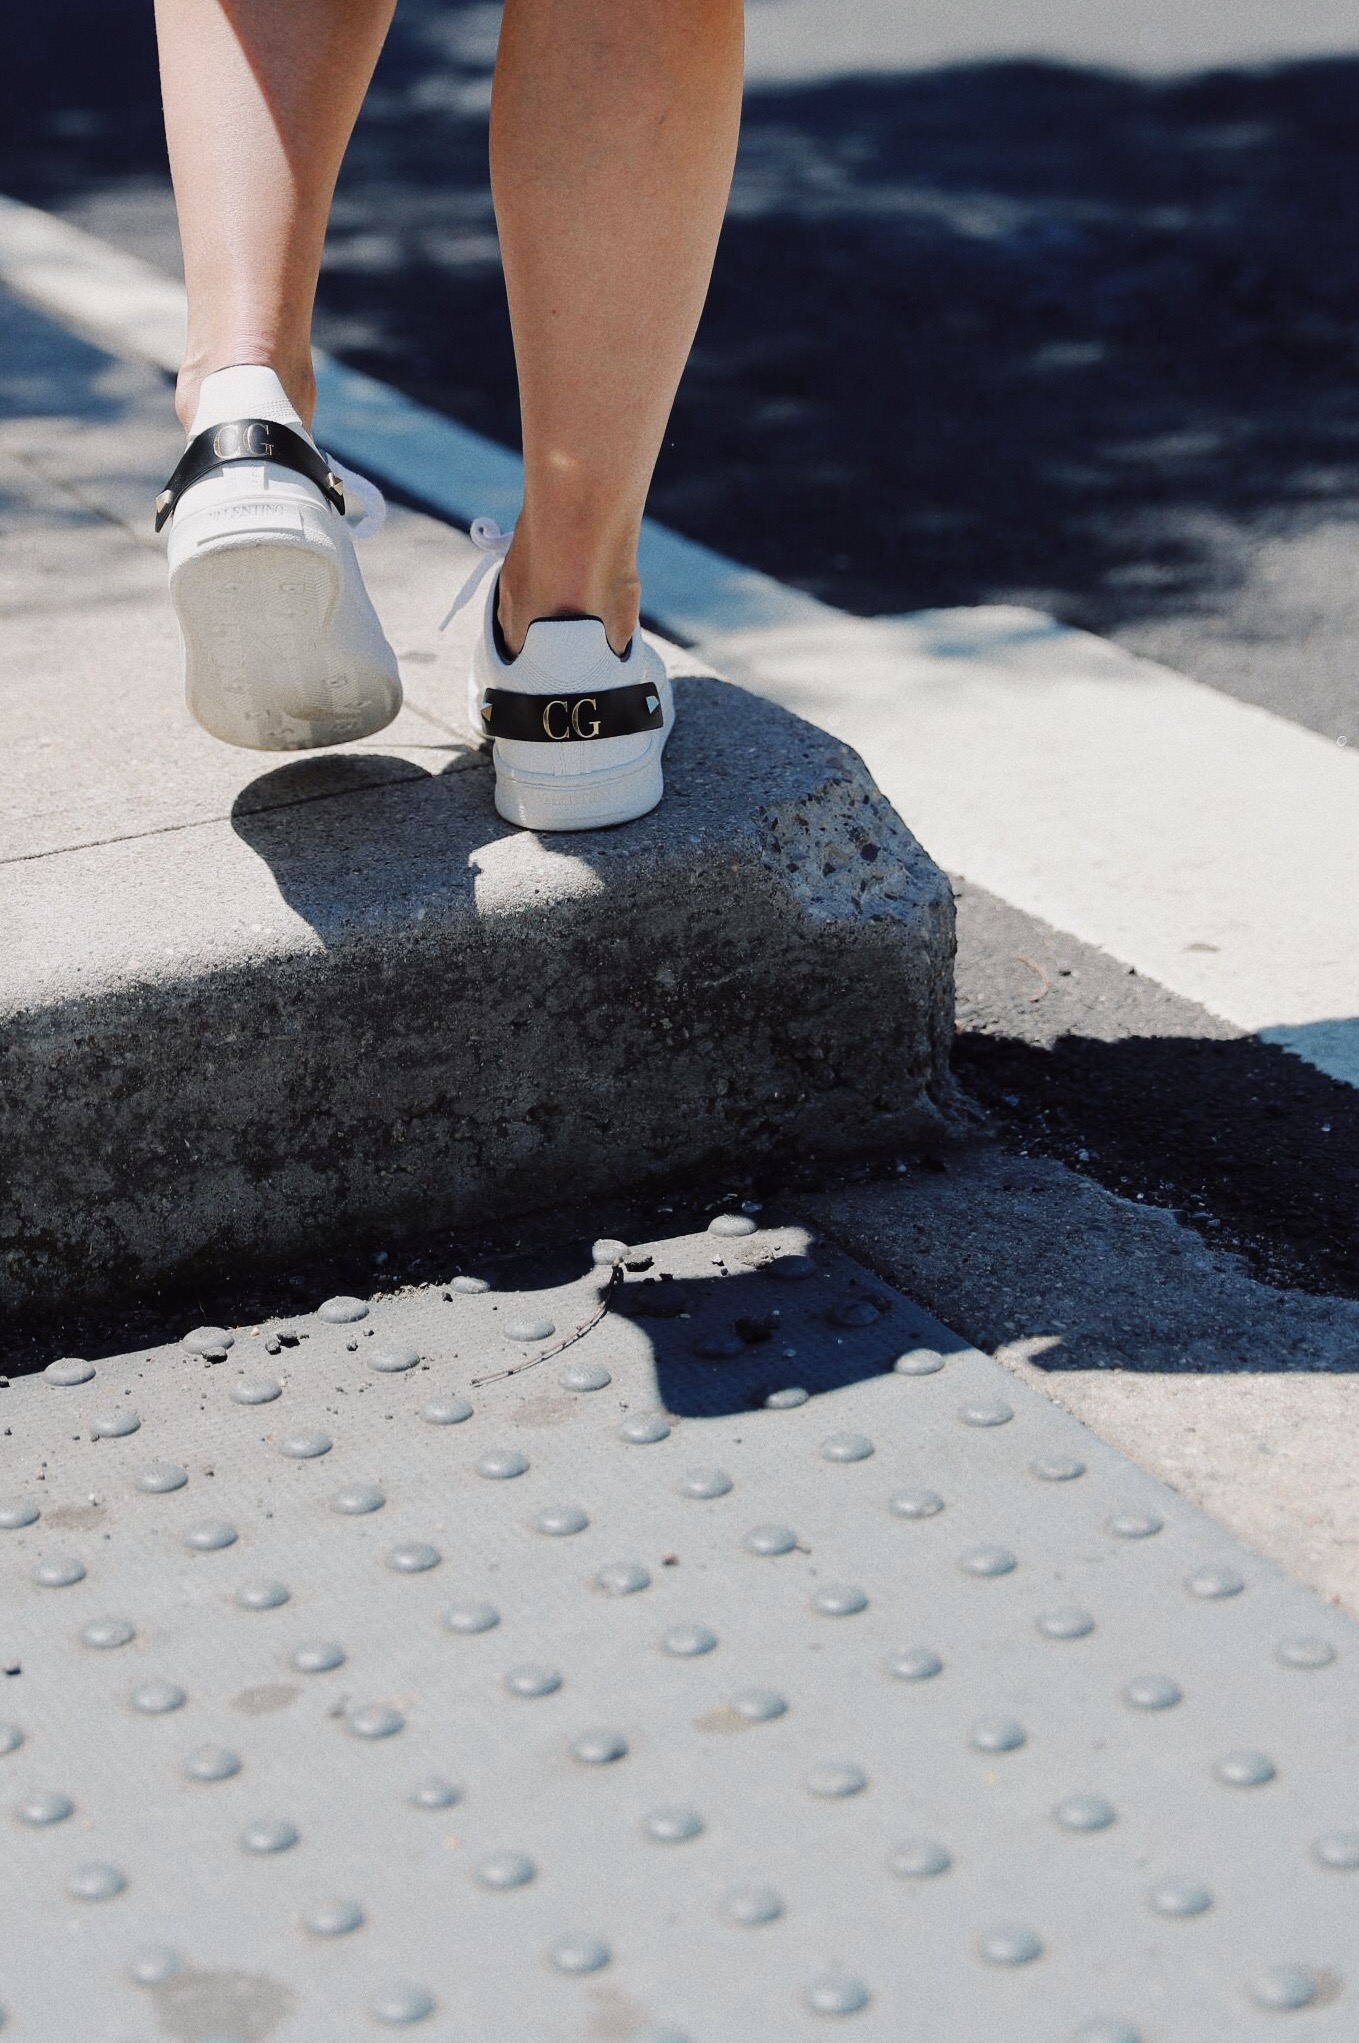 Valentino sneakers worn by Charlotte Groeneveld from Thefashionguitar